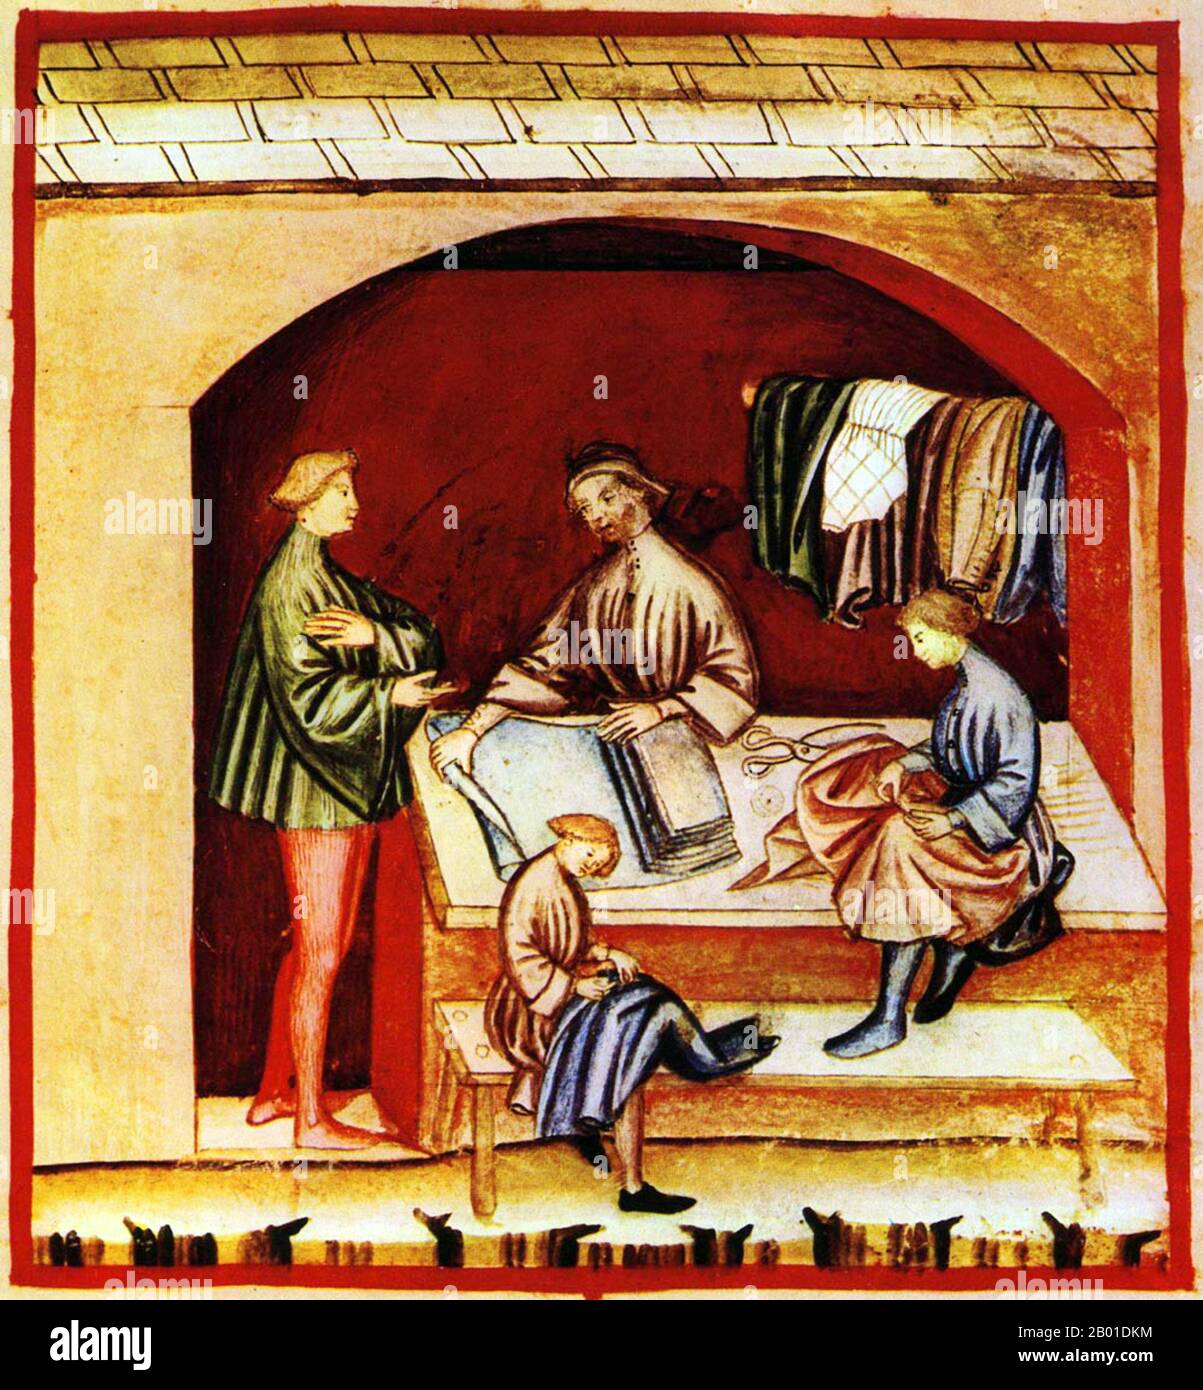 Iraq/Italy: Preparing silk clothing at a tailor's shop. Illustration from Ibn Butlan's Taqwim al-sihha or 'Maintenance of Health', published in Italy as the Tacuinum Sanitatis, 14th century.  The Tacuinum (sometimes Taccuinum) Sanitatis is a medieval handbook on health and wellbeing, based on the Taqwim al‑sihha, an eleventh-century Arab medical treatise by Ibn Butlan of Baghdad.  Ibn Butlân was a Christian physician born in Baghdad and who died in 1068.  He set forth six elements necessary to maintain daily health. Stock Photo